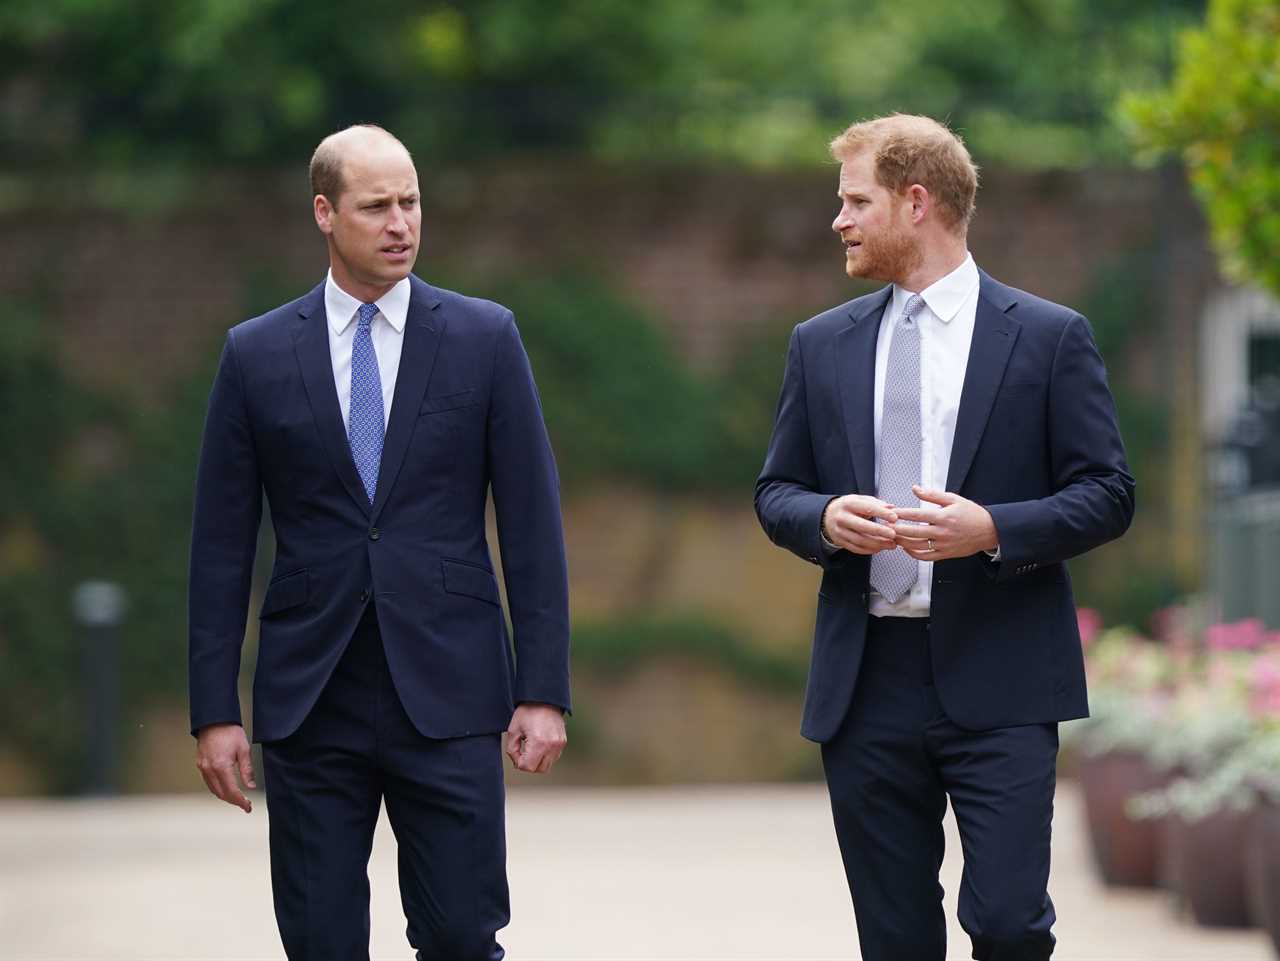 Prince Harry and William's Feud Began Before Meghan, Says Insider as They Reveal Row Which Sparked Long-Lasting Rivalry